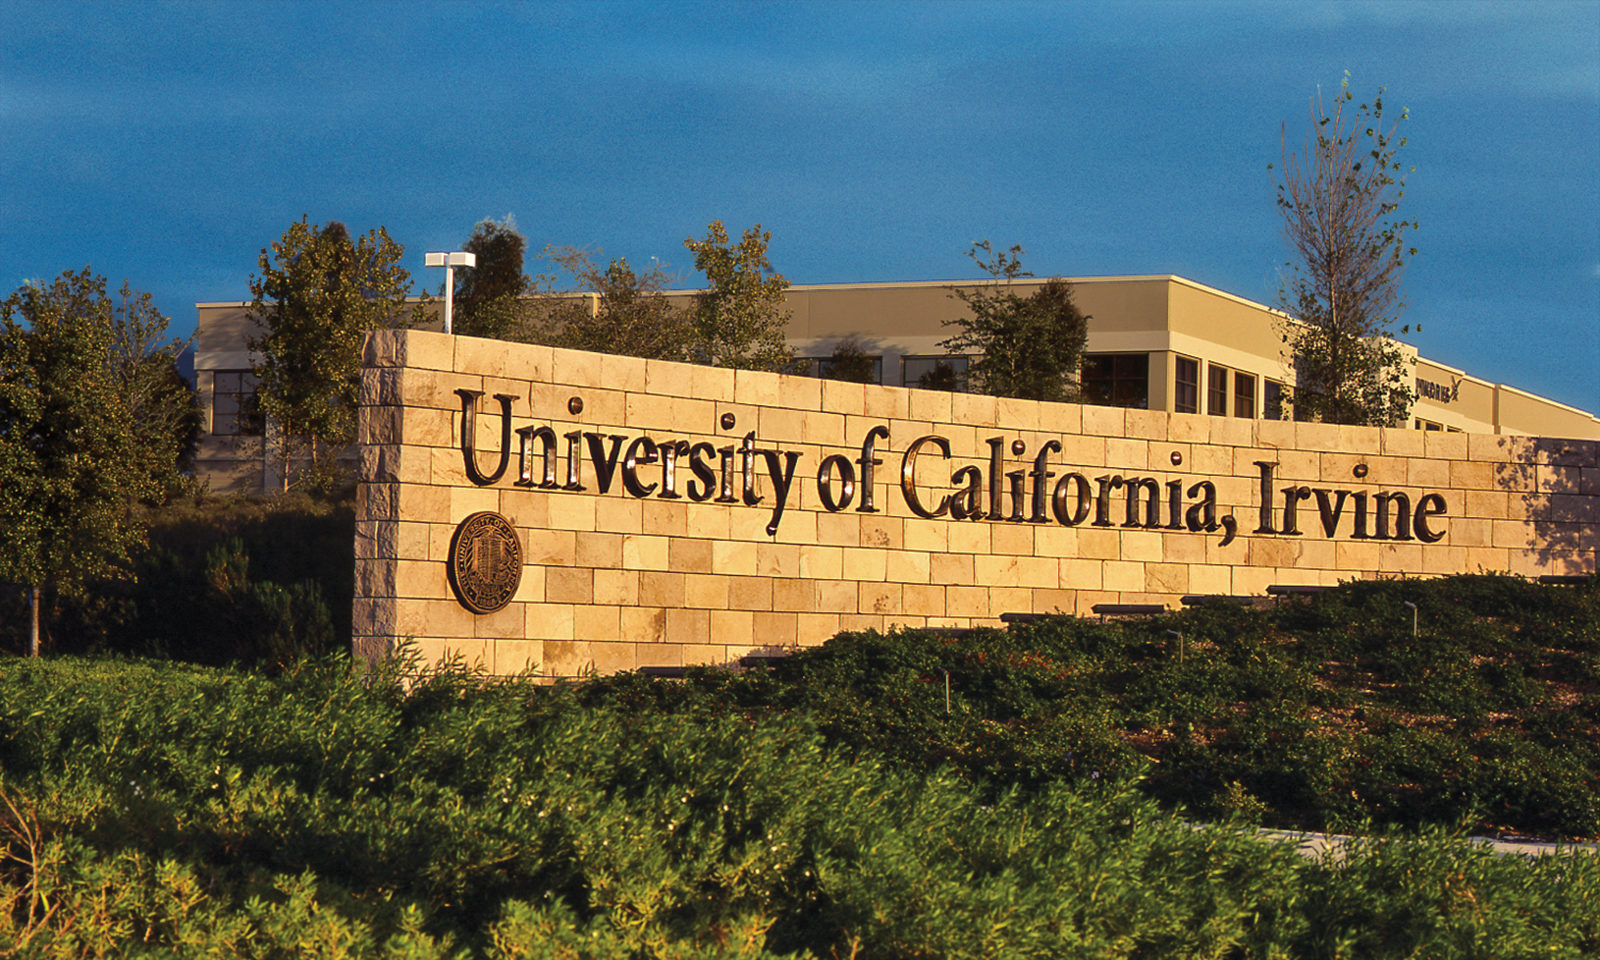 university-of-california-irvine-acceptance-rate-tuition-ranking-scholarships-programs-address-fees